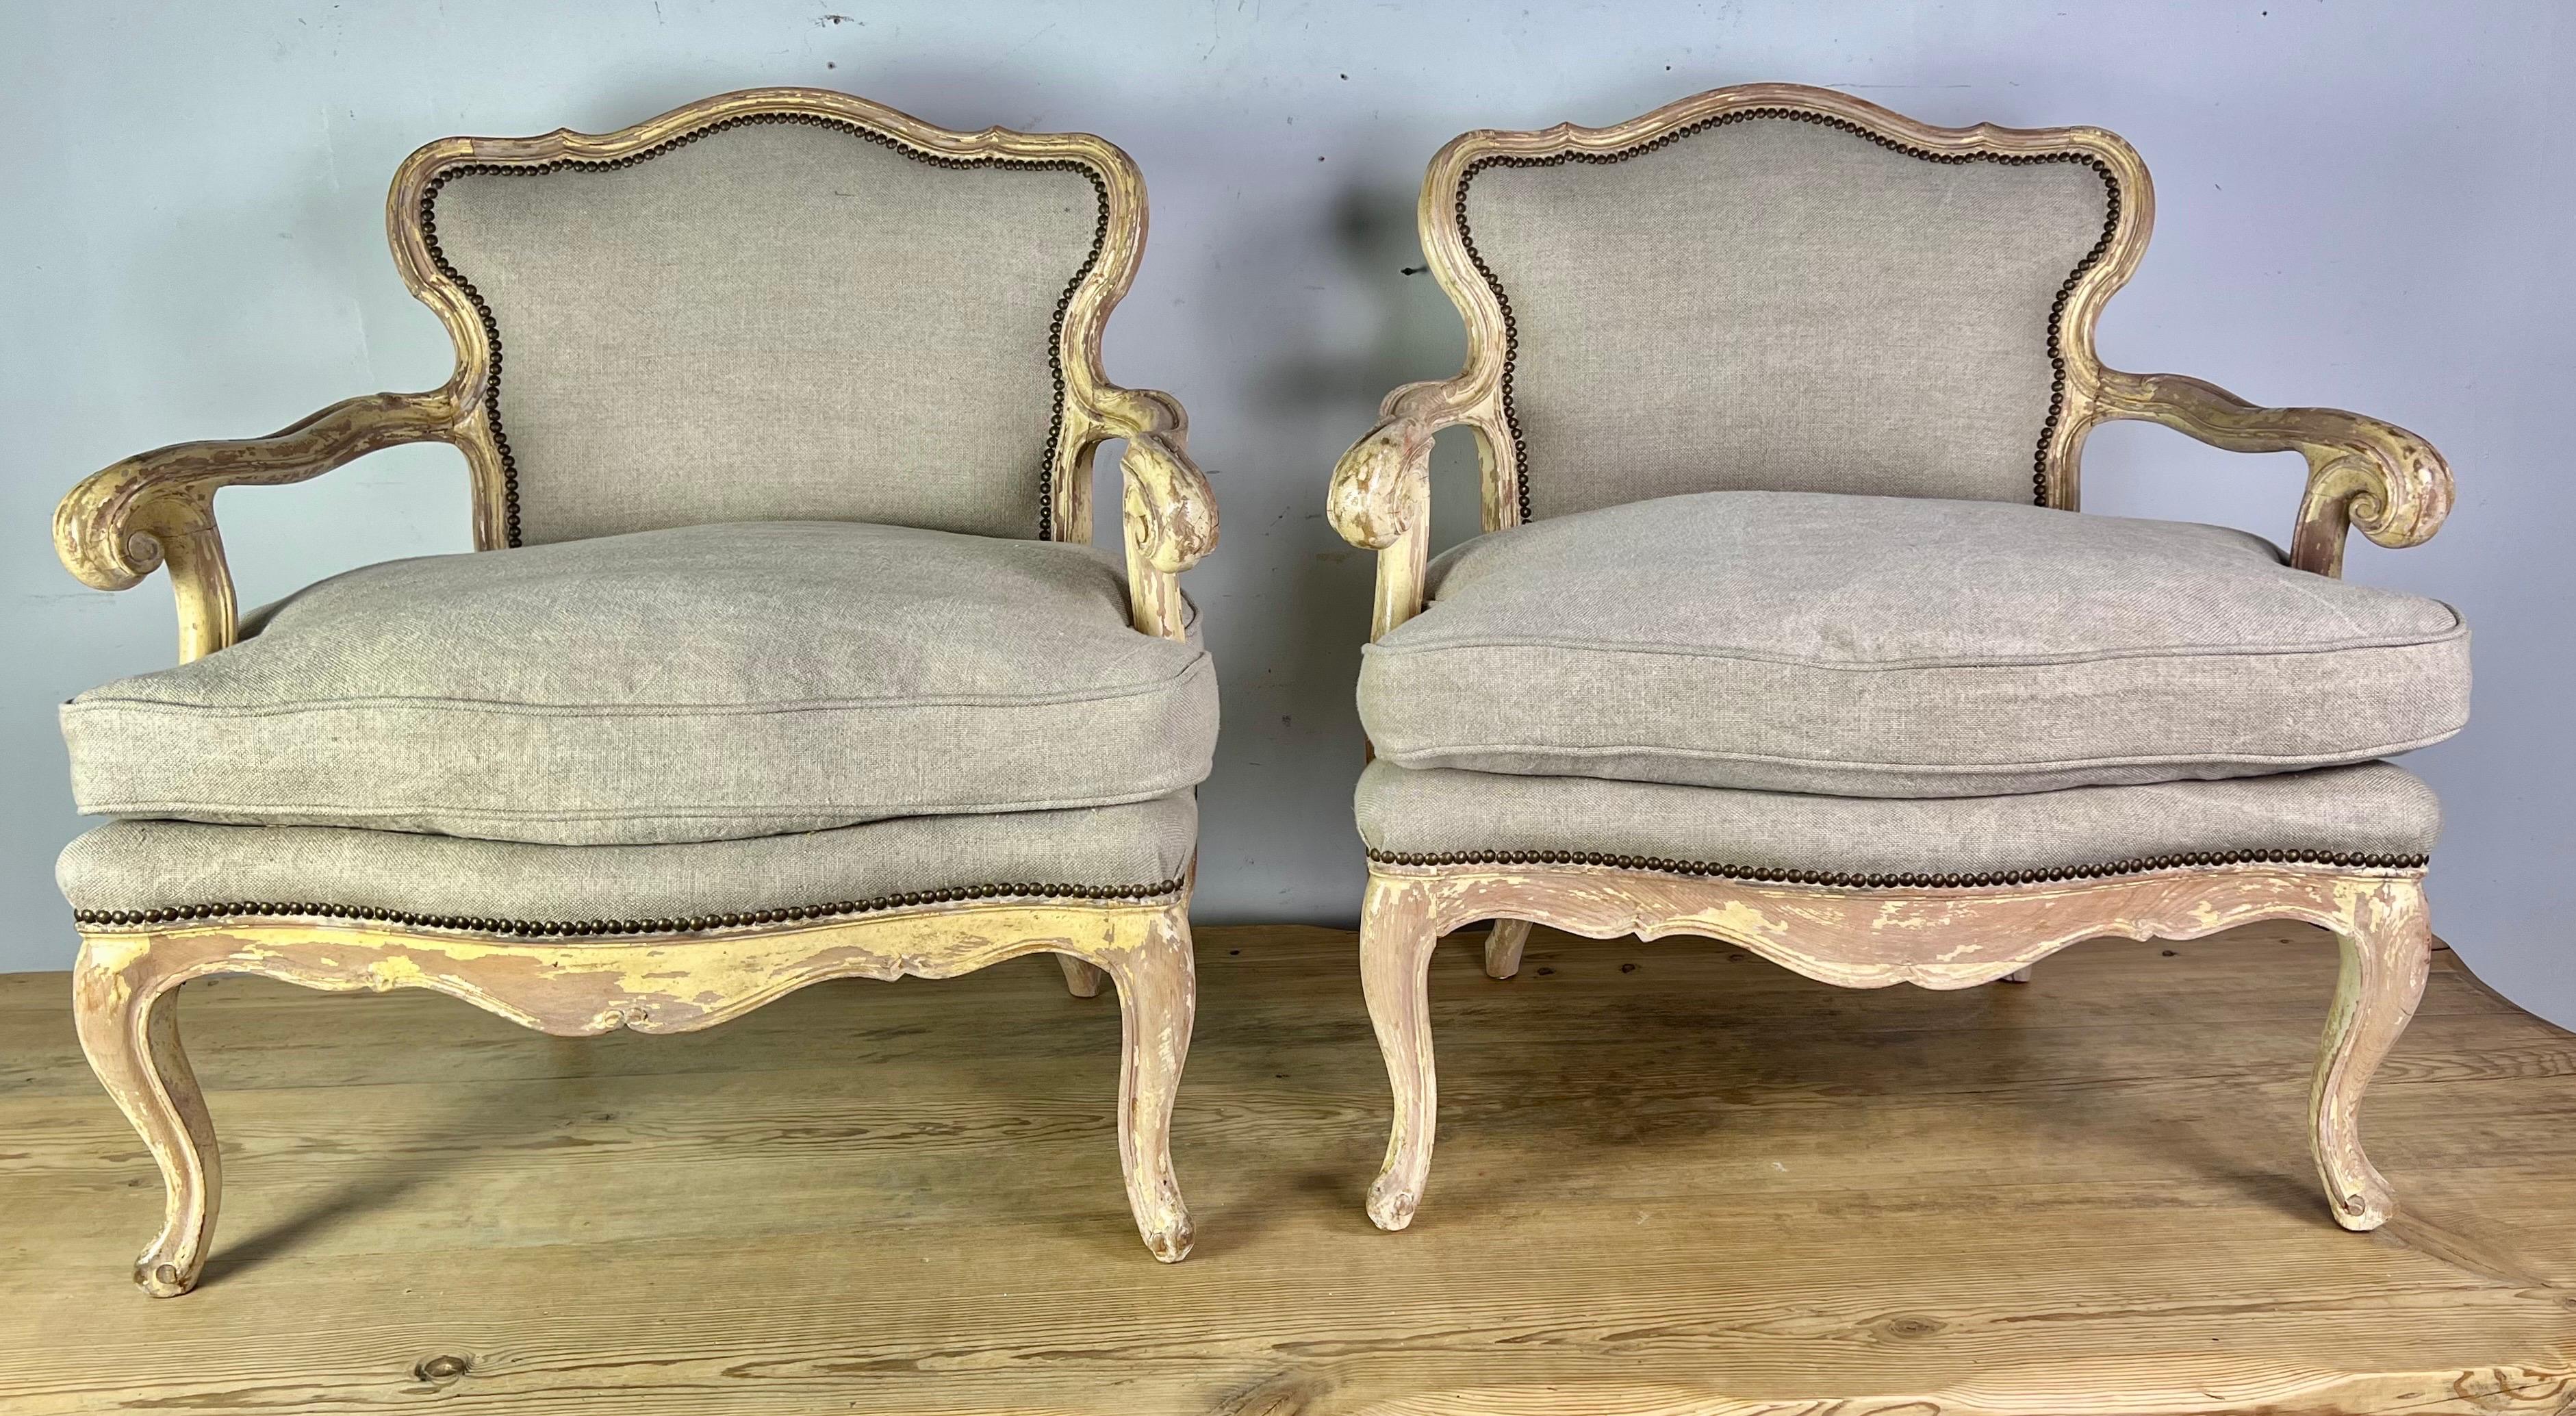 Early 20th century French Provincial pair of armchairs. The chairs have a unique shape with beautiful curves throughout. They were originally painted but only remnants of paint are left behind. The chairs stand on four cabriole legs with rams head